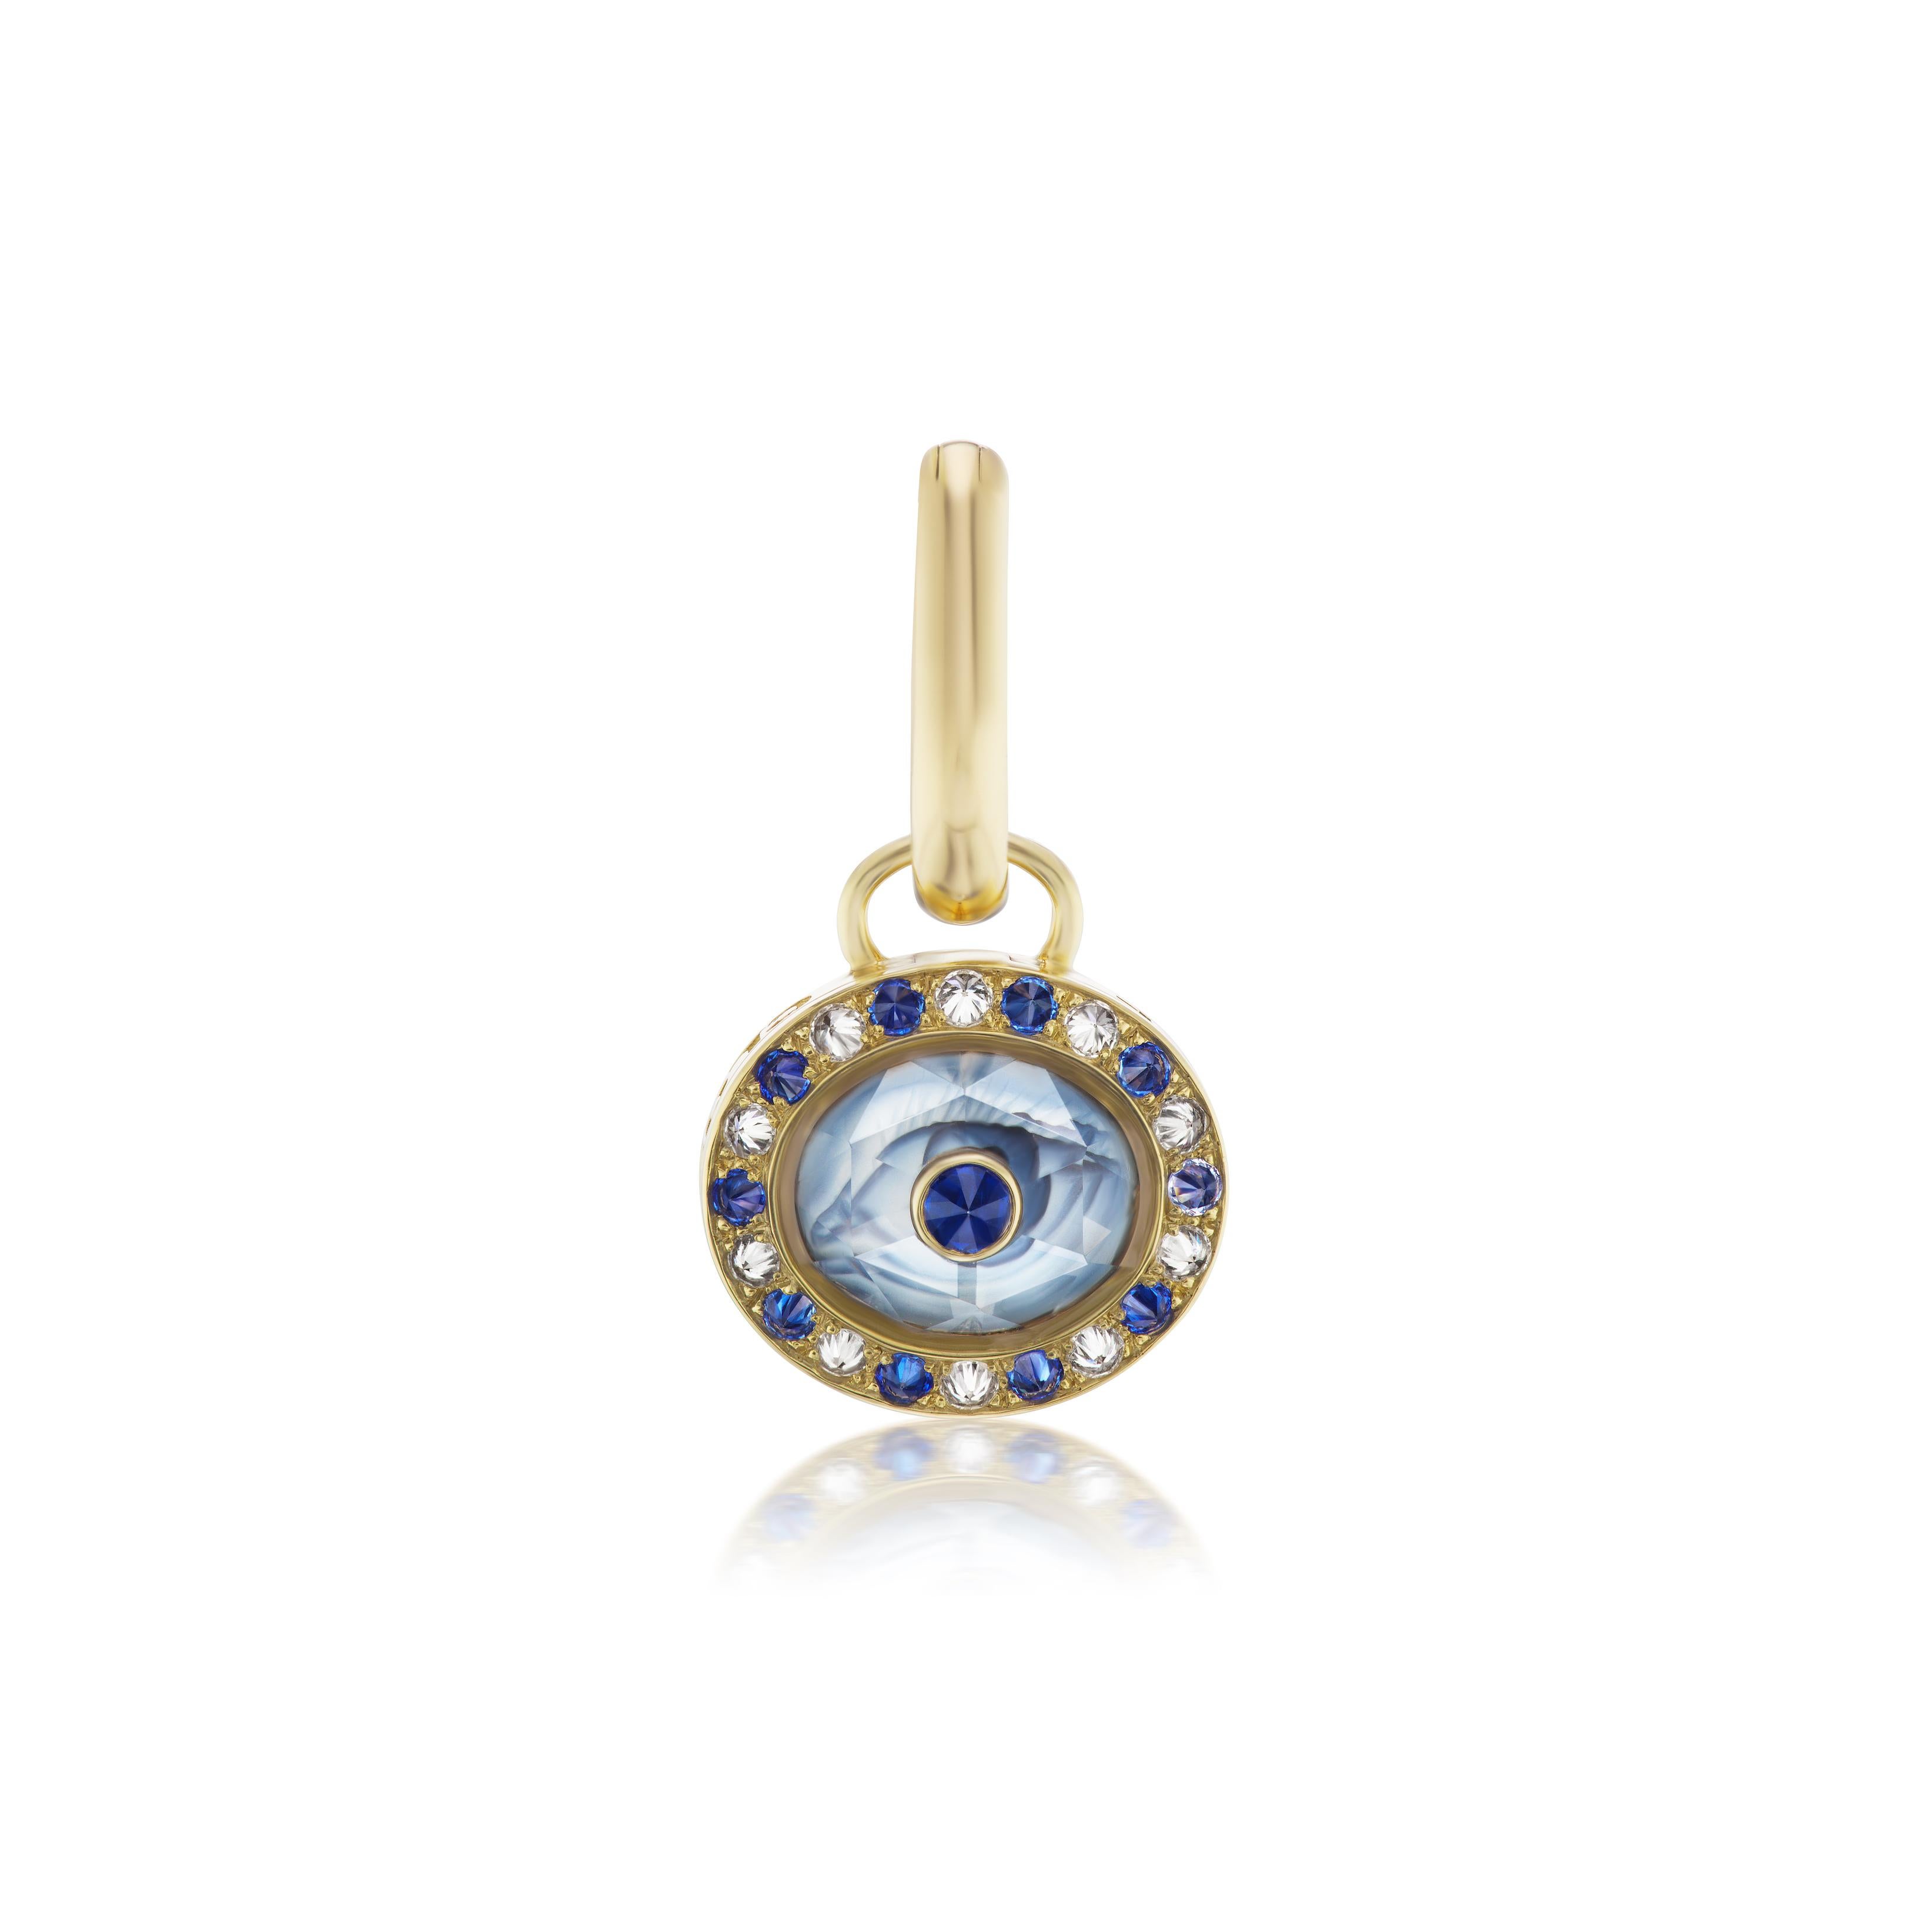 Ana-Katarina’s Love Locket Pendant is inspired by antique poison rings and her love of secrets. When closed, the Love Locket is a beautiful work of art. A hand-carved quartz crystal creates a faceted dome and is finished with an inverted sapphire